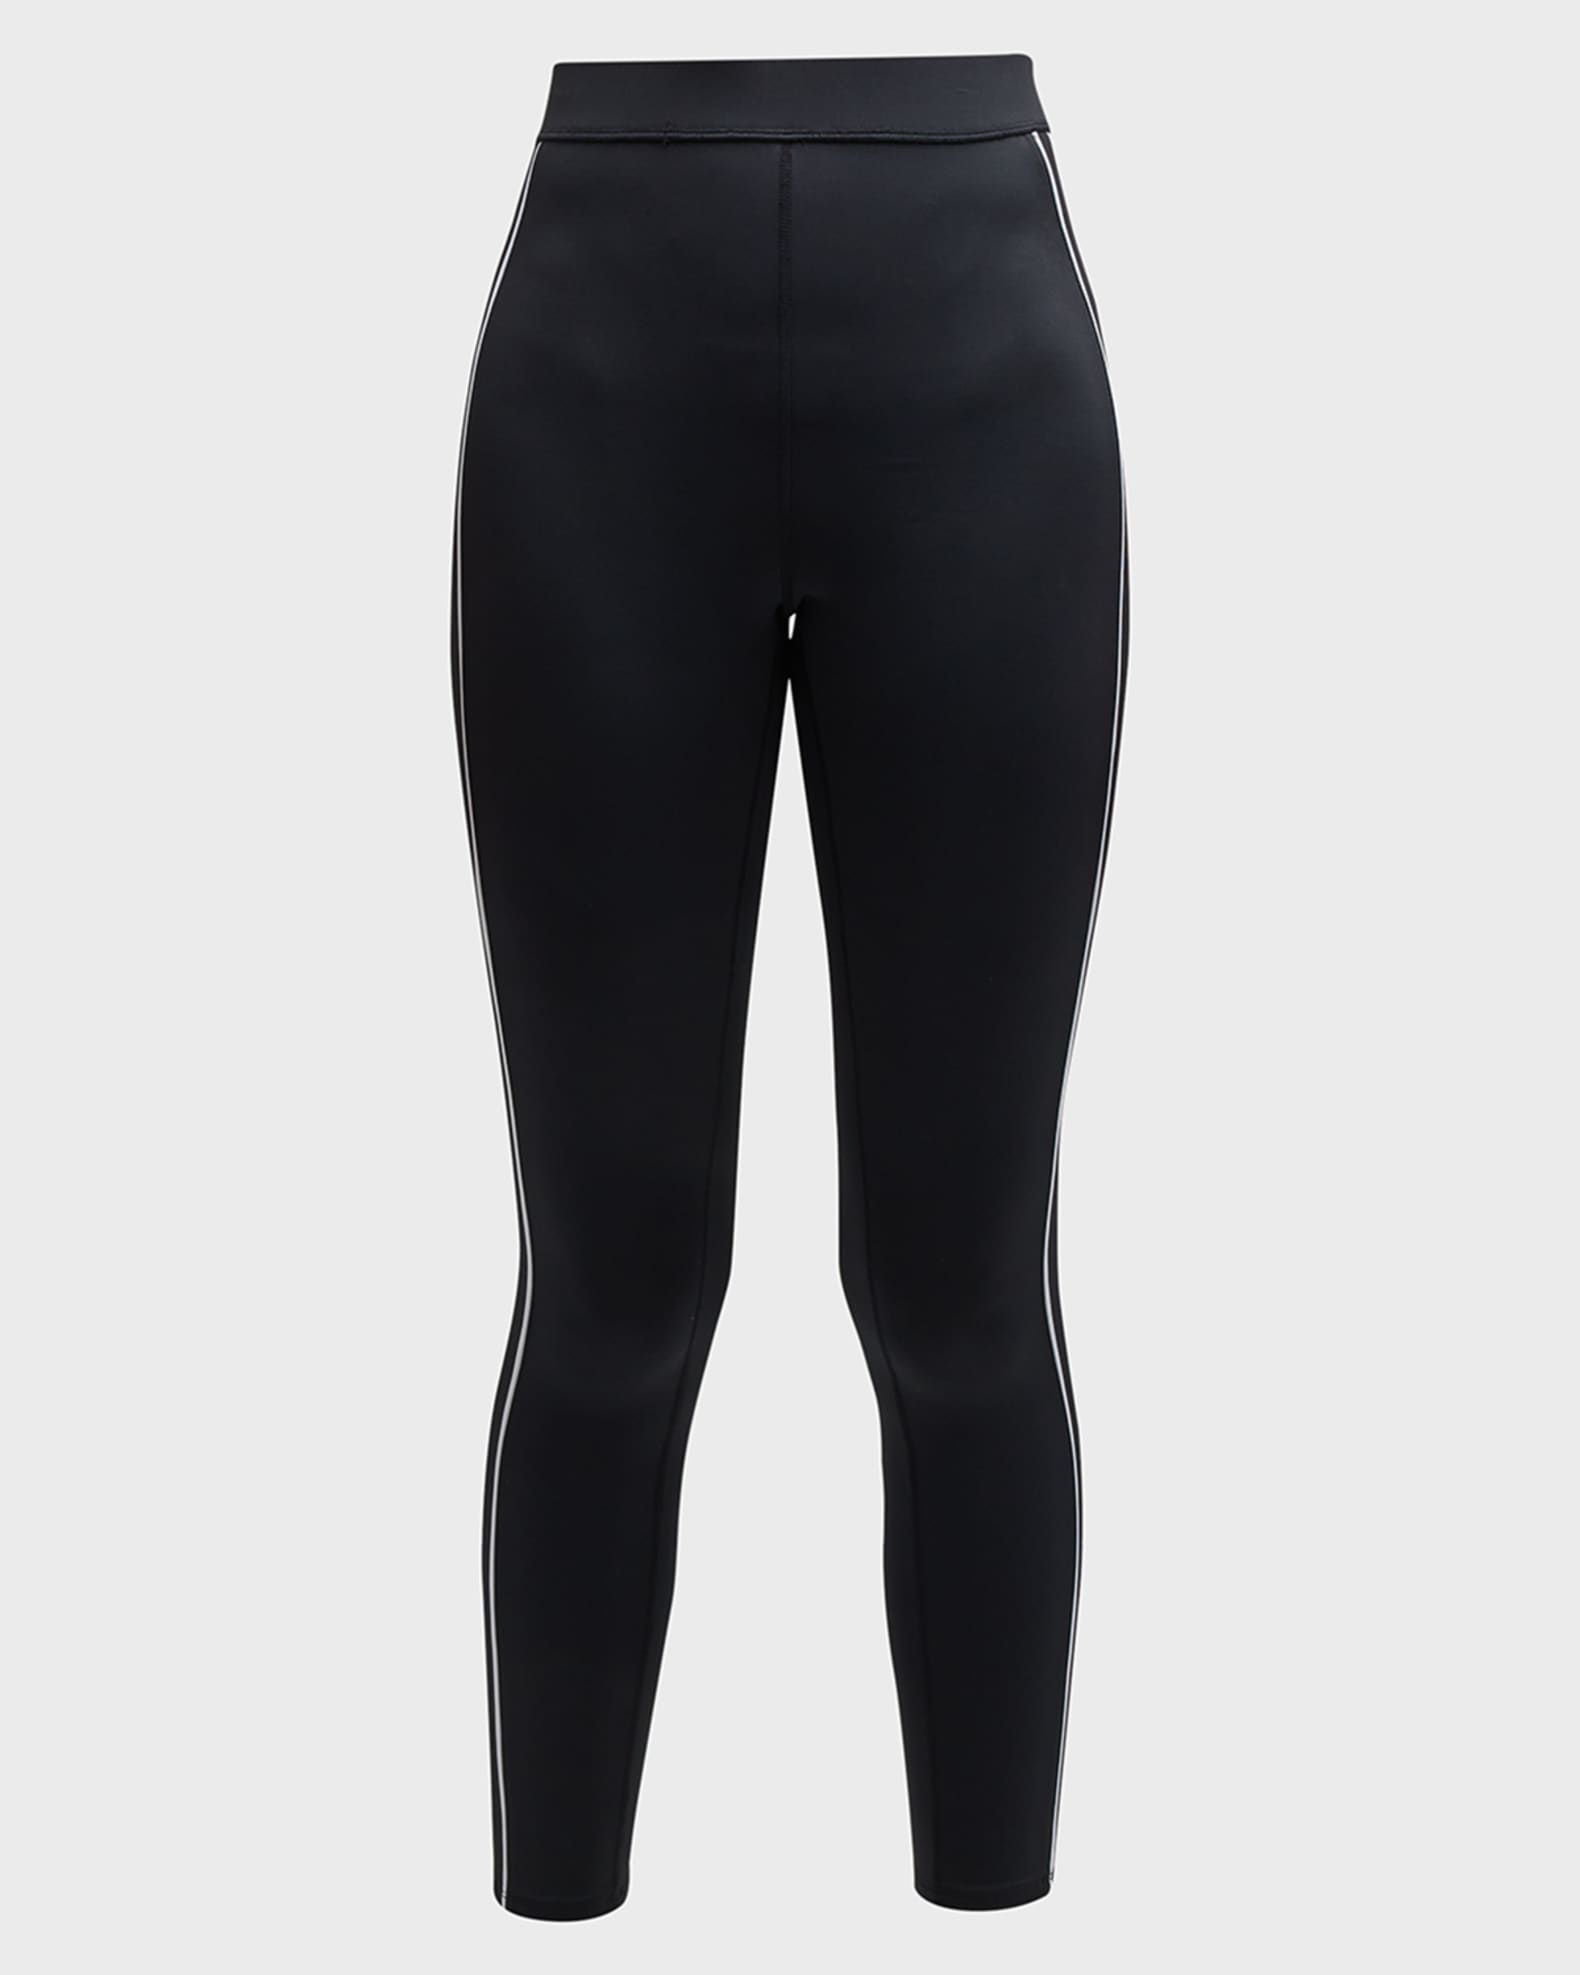 Fabrics 101: Airlift – The Ultra-Slimming Legging Fabric With A